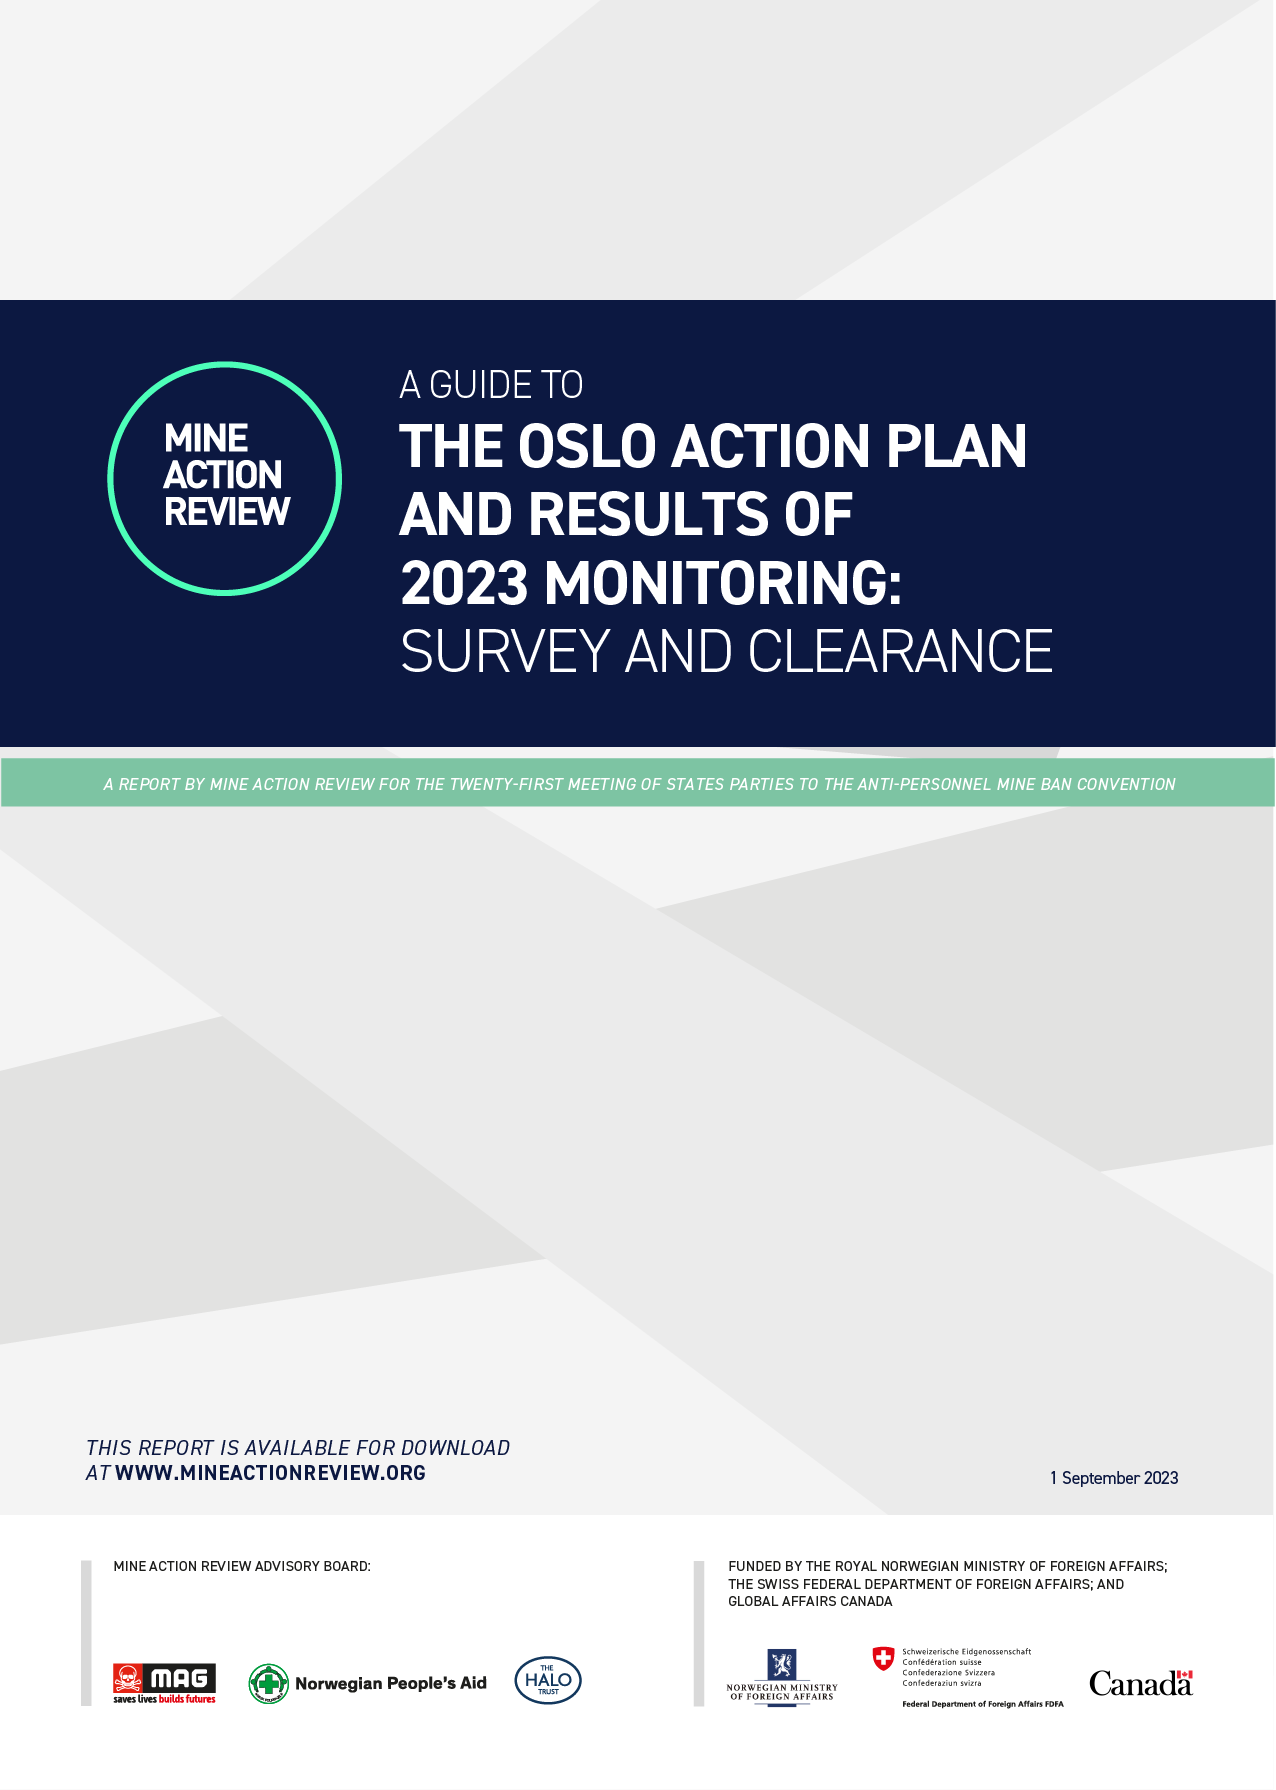 Guide to the Oslo Action Plan and Results of the 2023 Monitoring